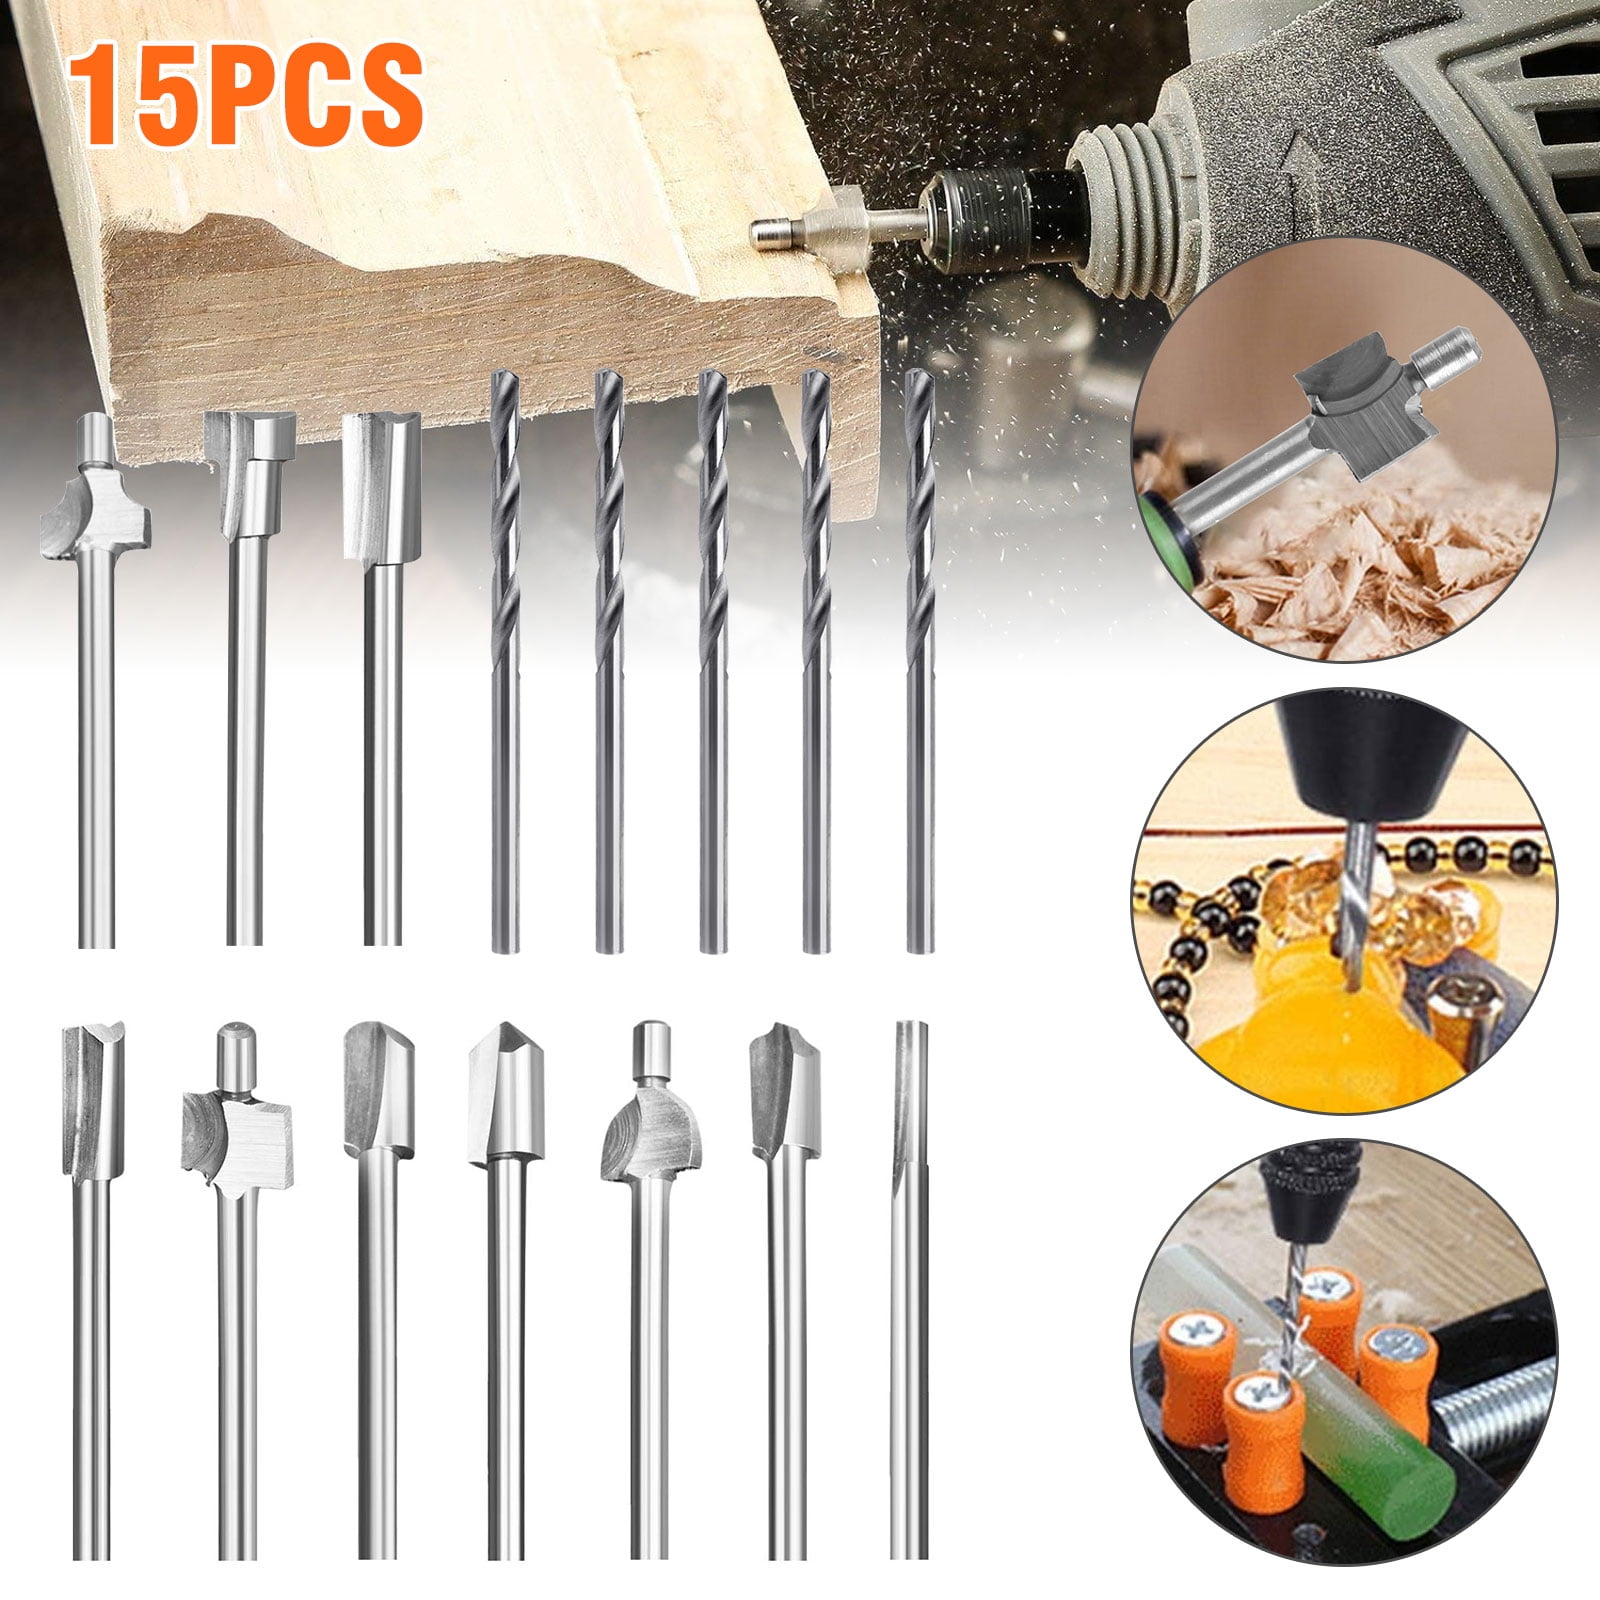 10X Dremel Rotary Tool Cutting Attachment Kit HSS Router Drill Bits Carving SetG 